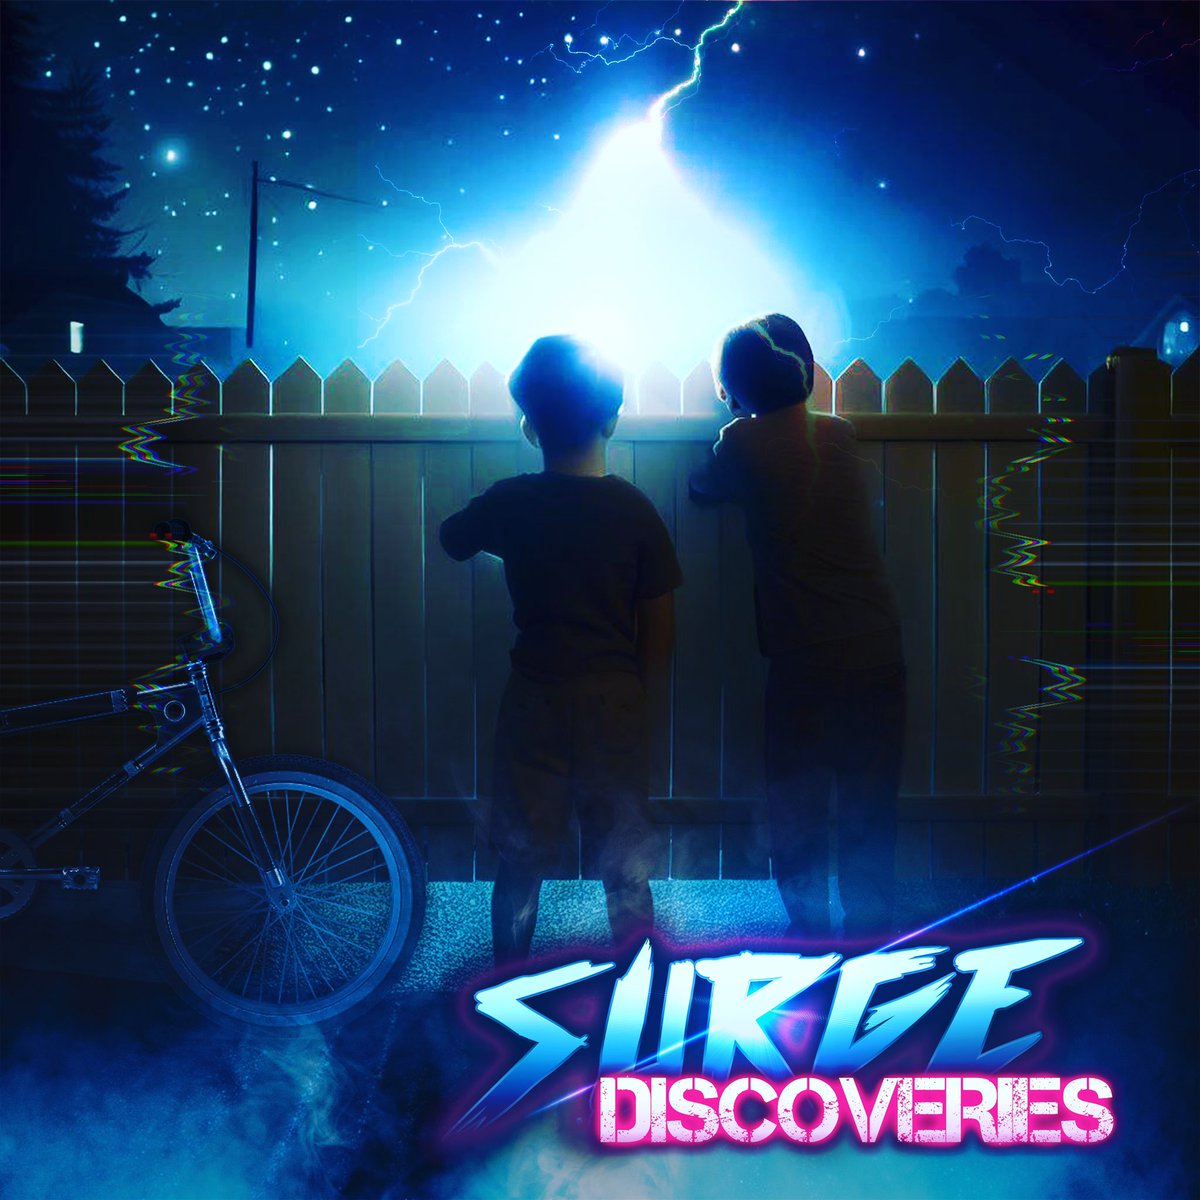 🔊⚡️Onwards on this musical journey! 🙂Preview coming soon. 🙂 #syntwave #retrowave #80s #retroscifi #sciencefiction #scifi